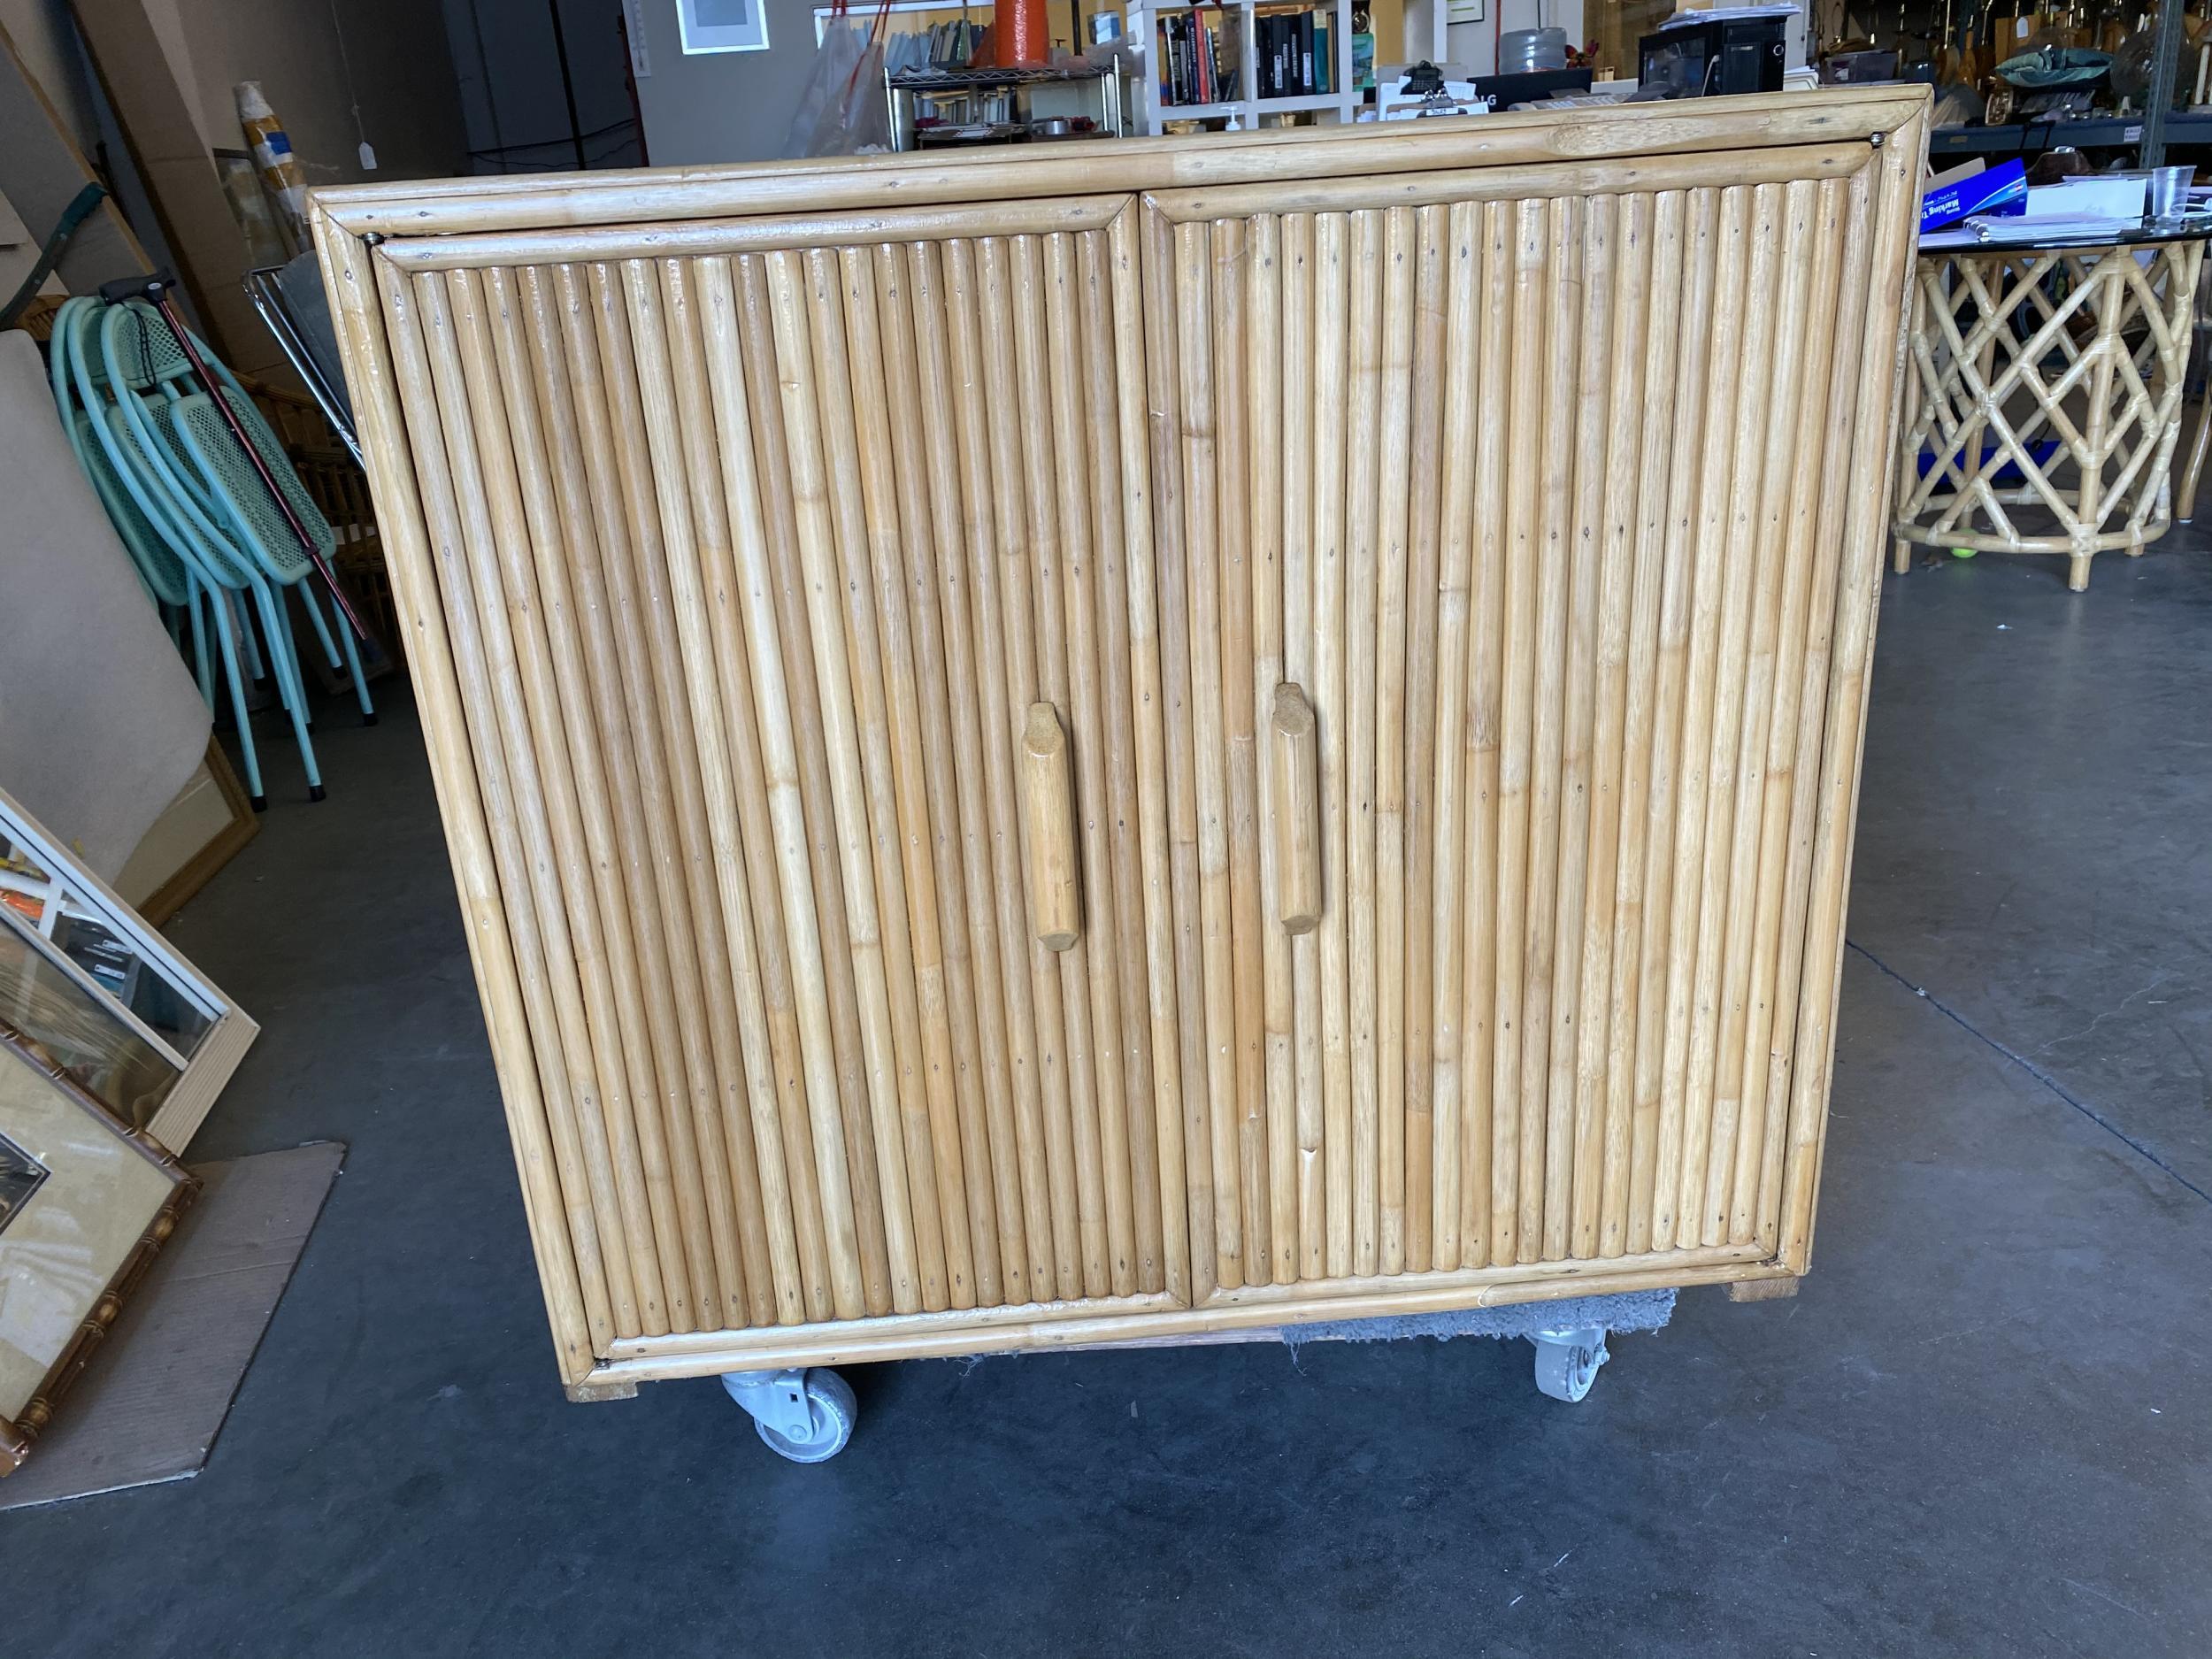 Vertically stacked rattan lowboy cabinet with a solid mahogany top. The cabinet features double doors and two adjustable shelves. 

Restored to new for you.

All rattan, bamboo, and wicker furniture has been painstakingly refurbished to the highest